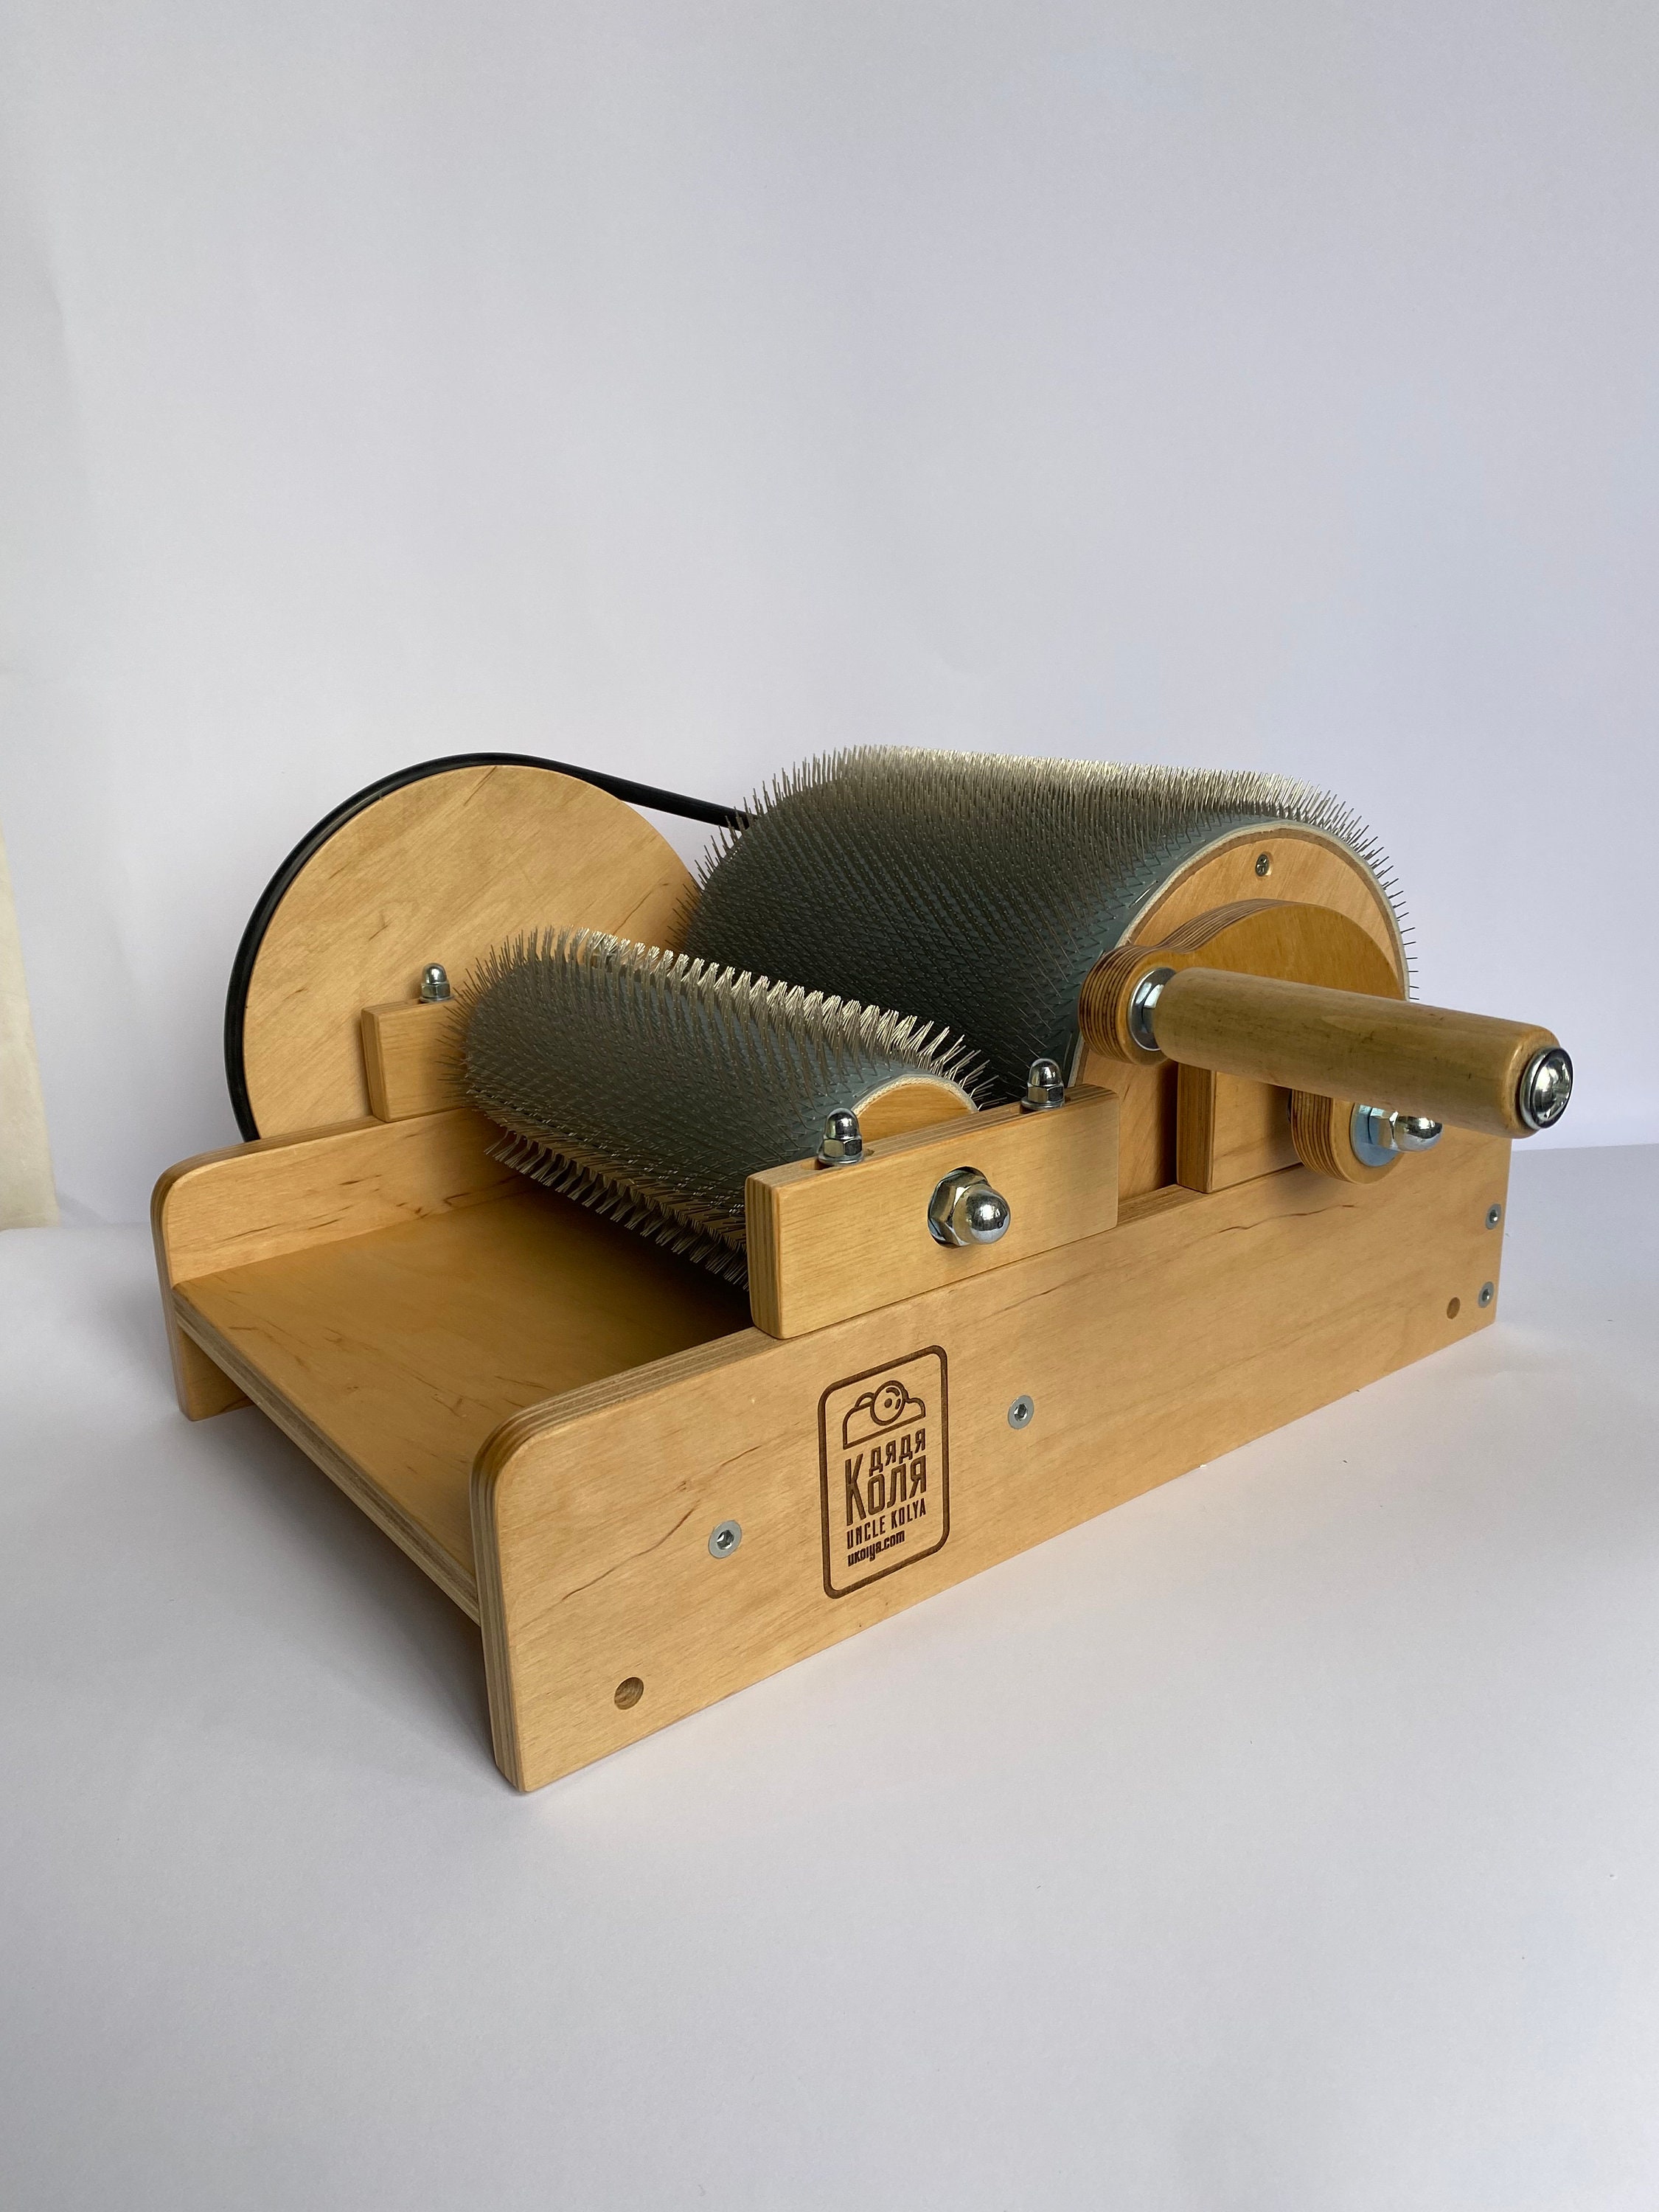 Does anyone know what company/drum carder this is? I recently got this  exact model from my local textile museum as an antique and I can't figure  it out. Any help would be